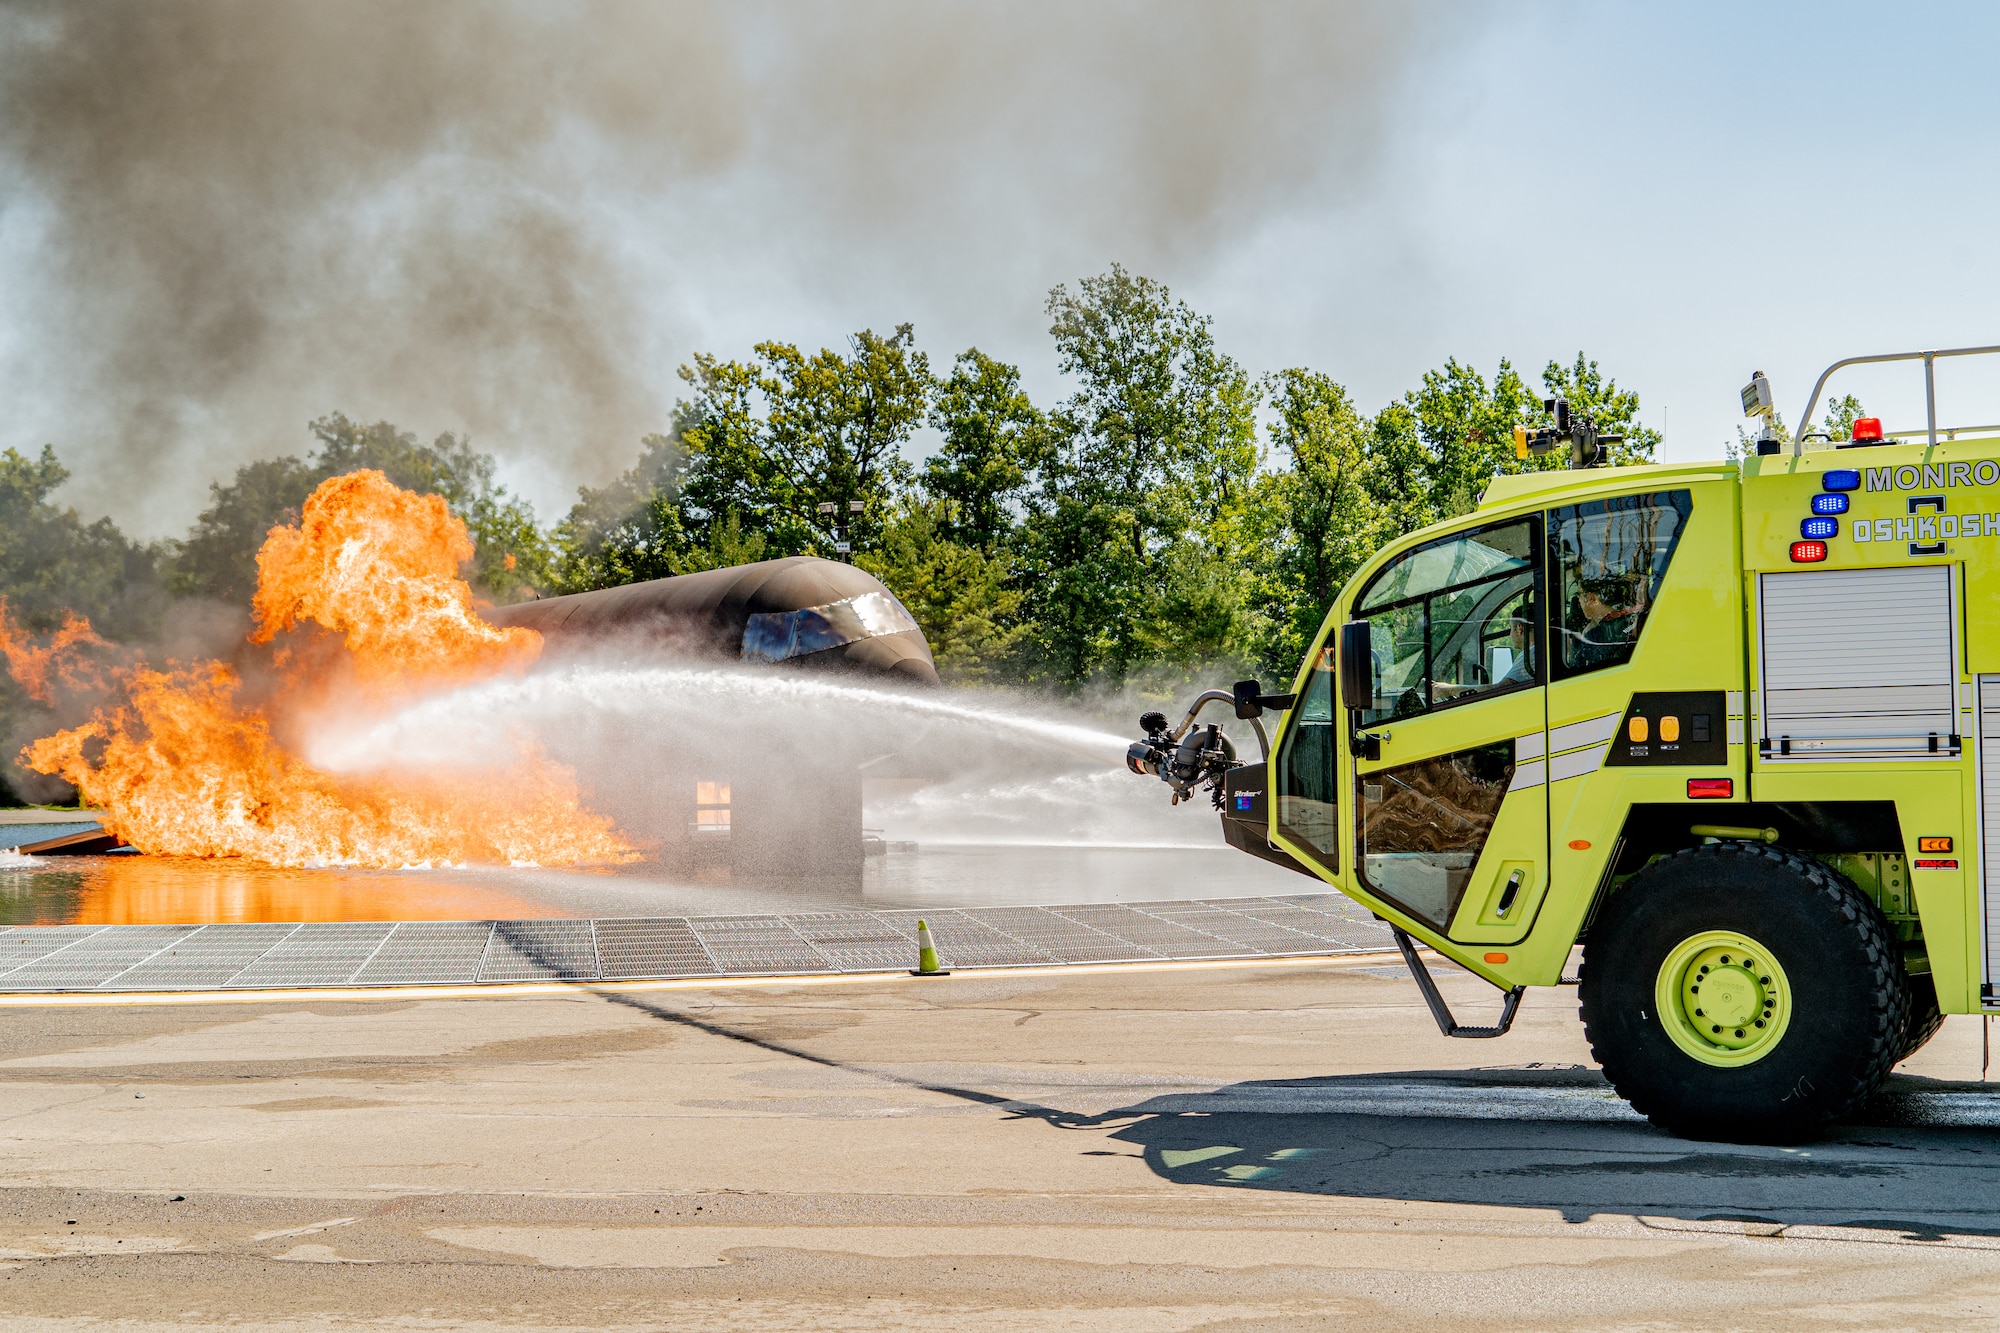 Firefighters with the 914th Fire Emergency Services control a firetrucks water cannon to put out a simulated aircraft's fire during training.